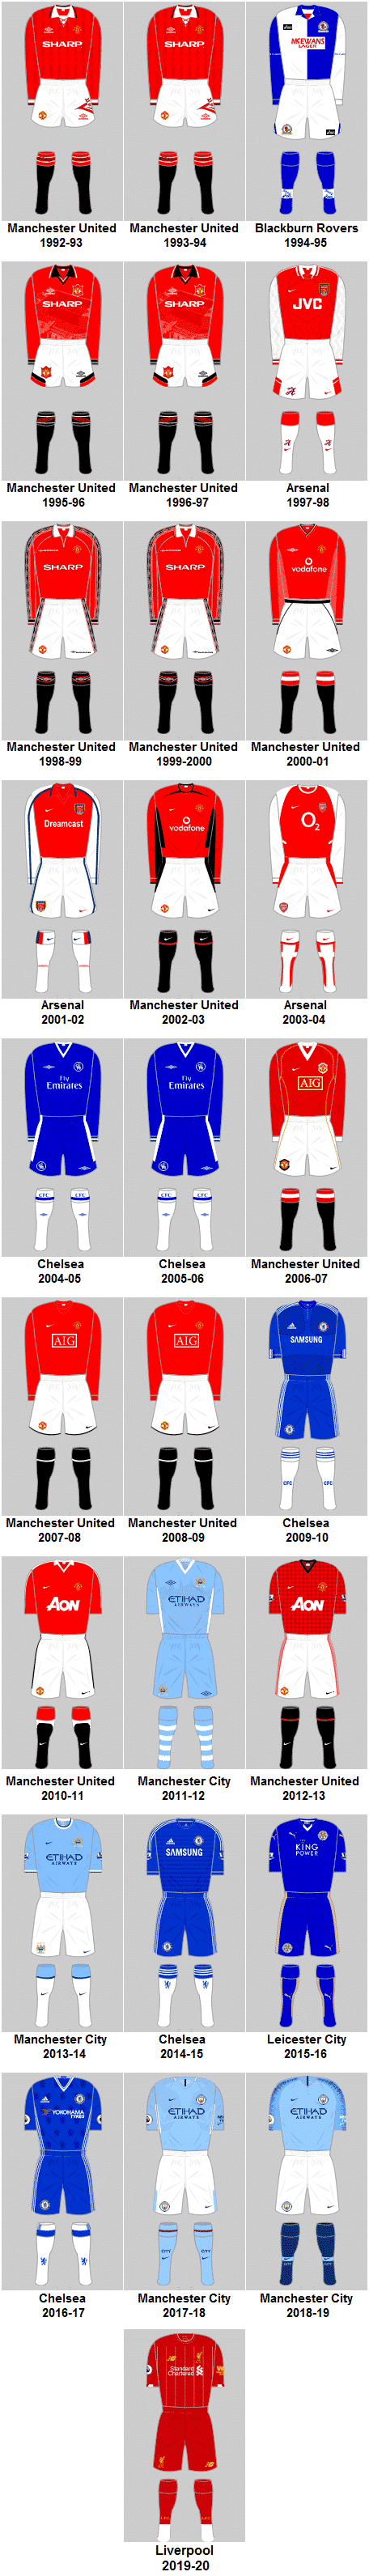 Premier League Champions’ Playing Kits 1992-93 to 2019-20